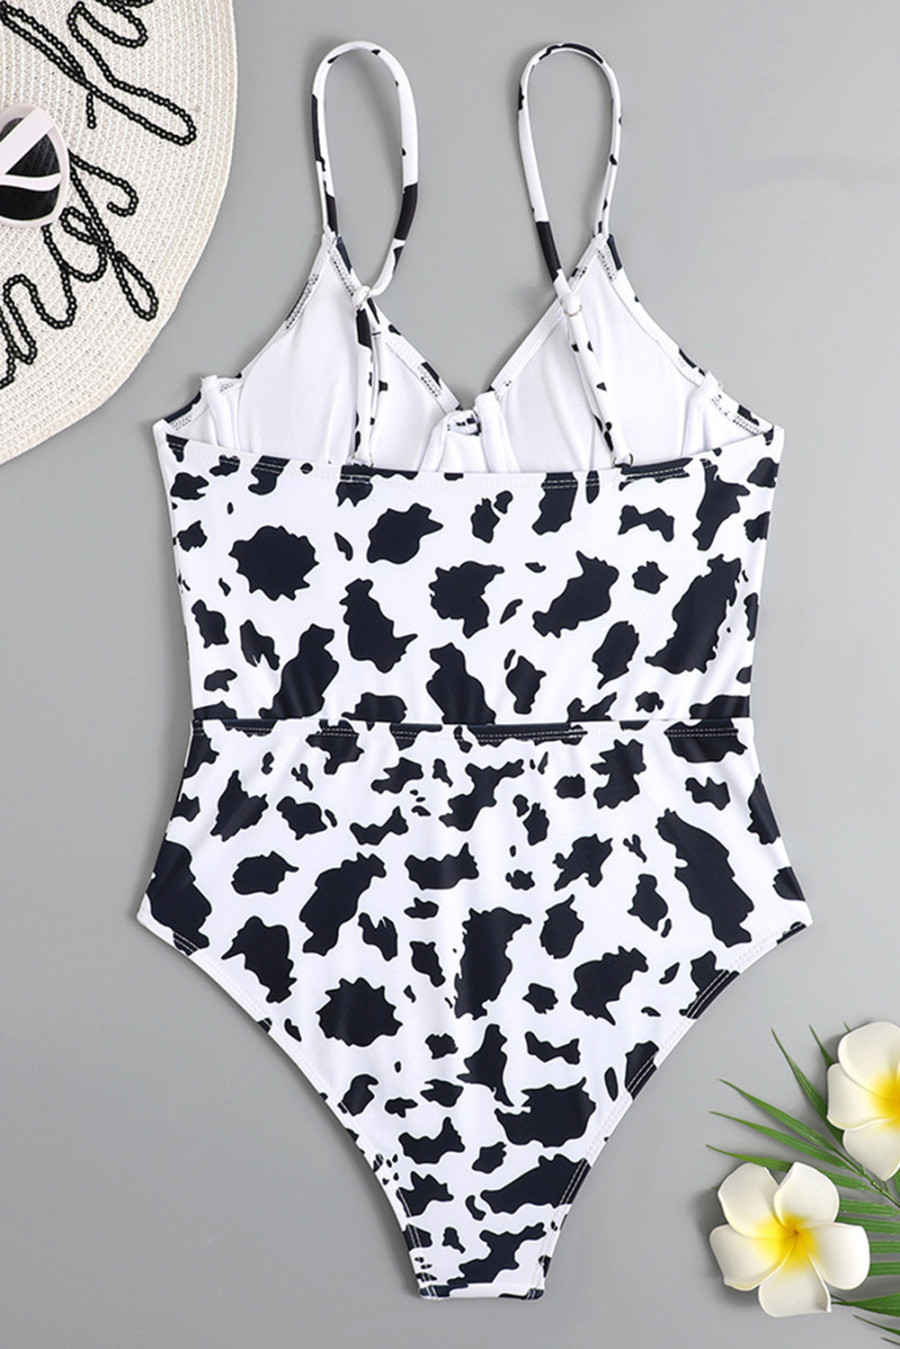 SHEWIN White Cow Print One Piece Swimsuit - SHEWIN